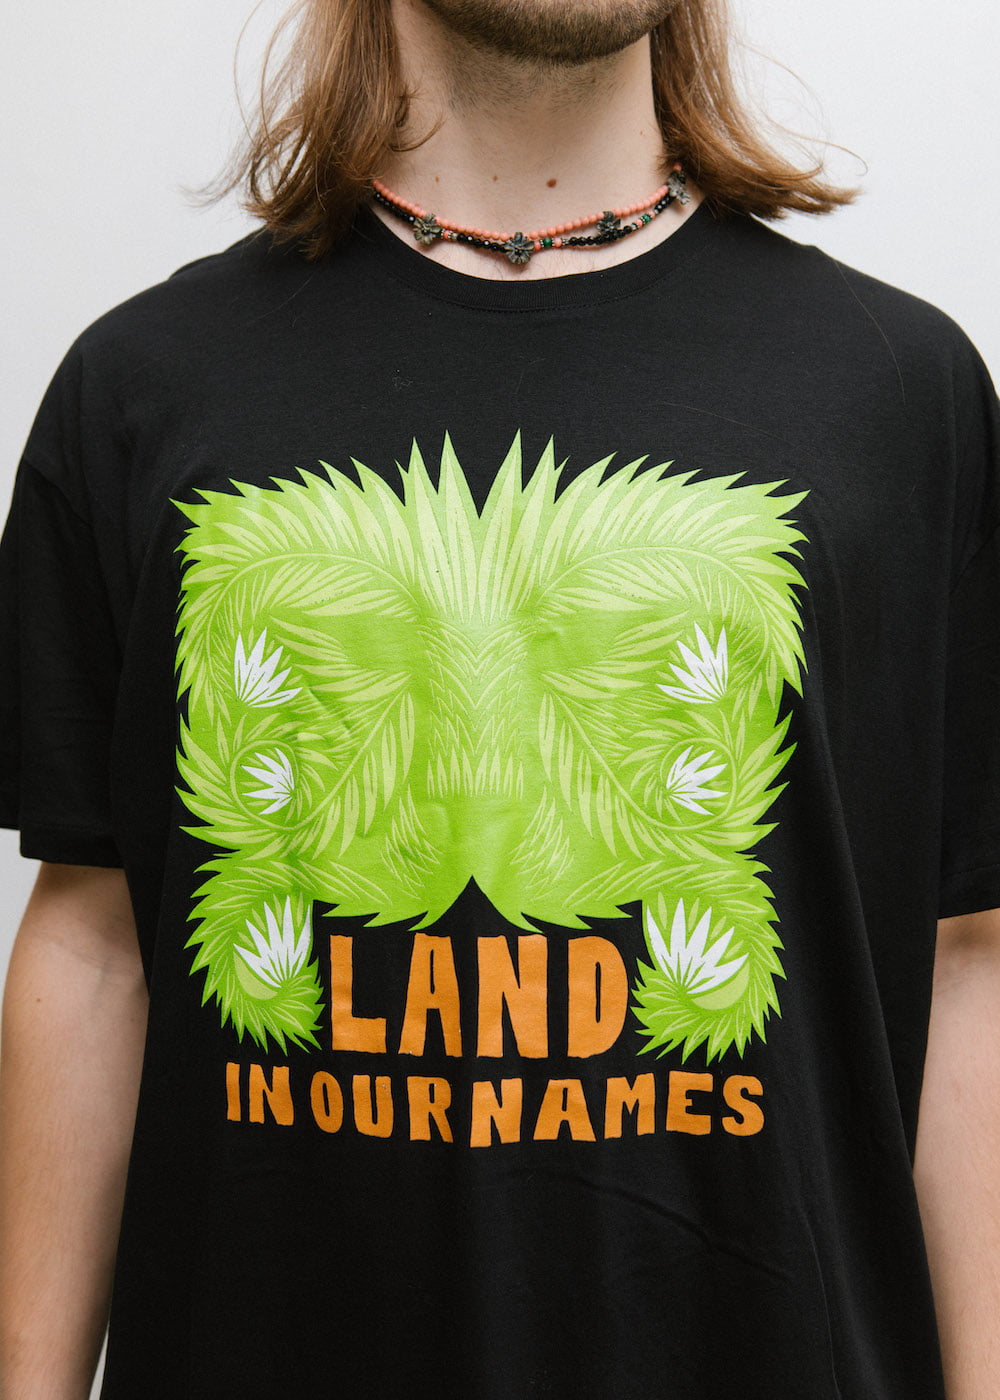 Land In Our Names shirt photography by Ellie Ramsden for Freedom Press